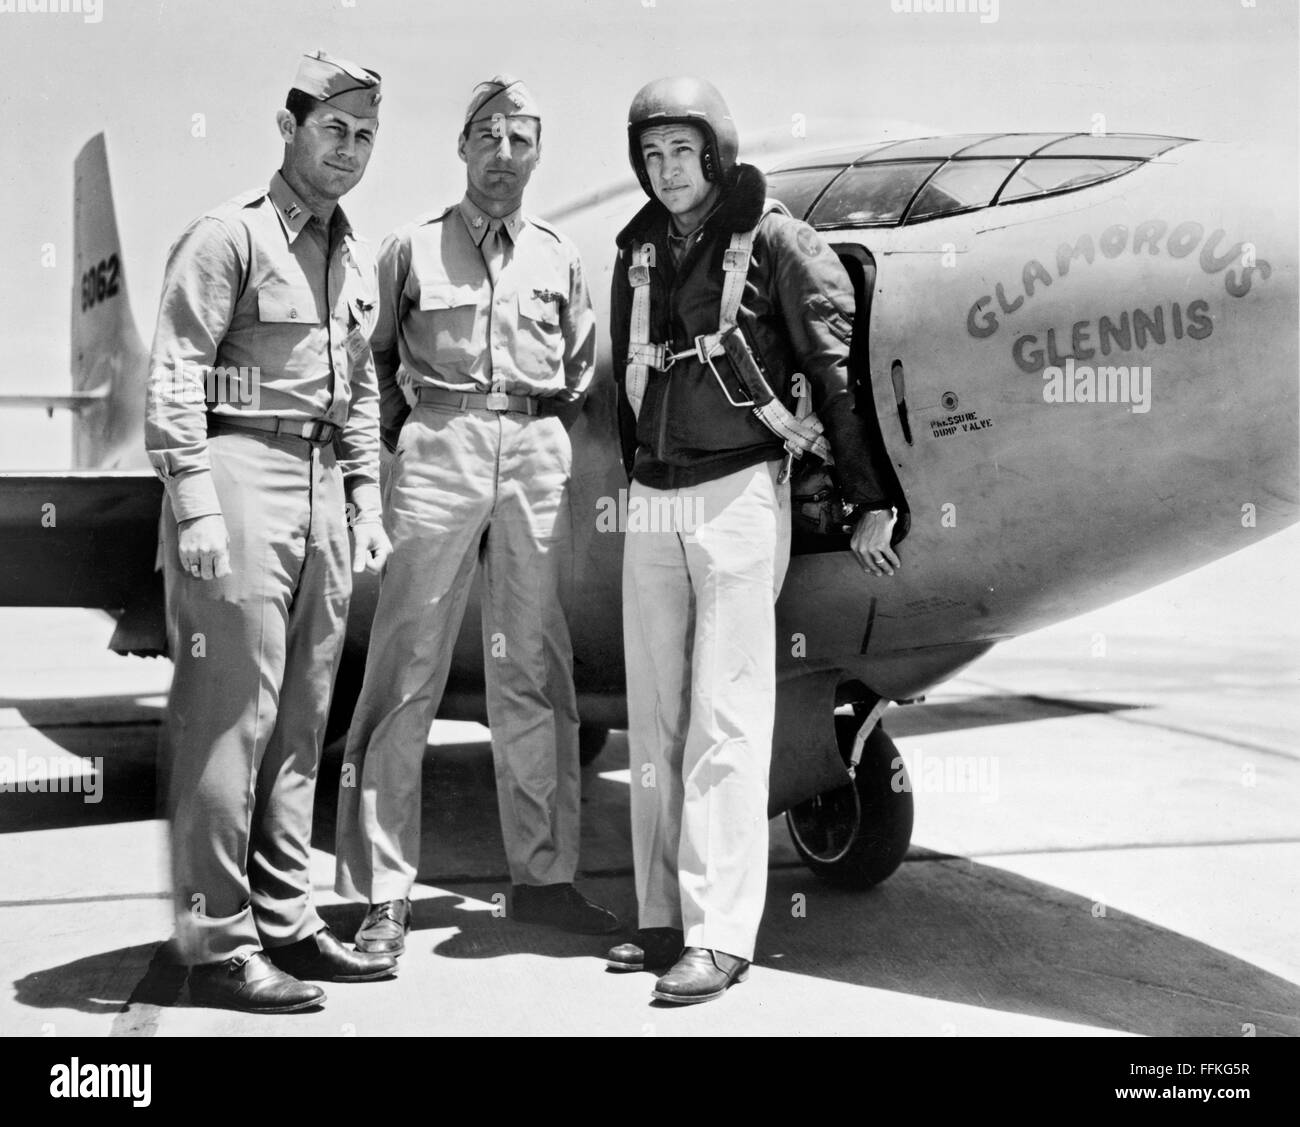 Glamorous Glennis. The Bell X-1 'Glamorous Glennis' with, left to right, Captain Chuck Yeager, Major Gus Lundquist and Captain James Fitzgerald. Photo c.1947-1948 Stock Photo